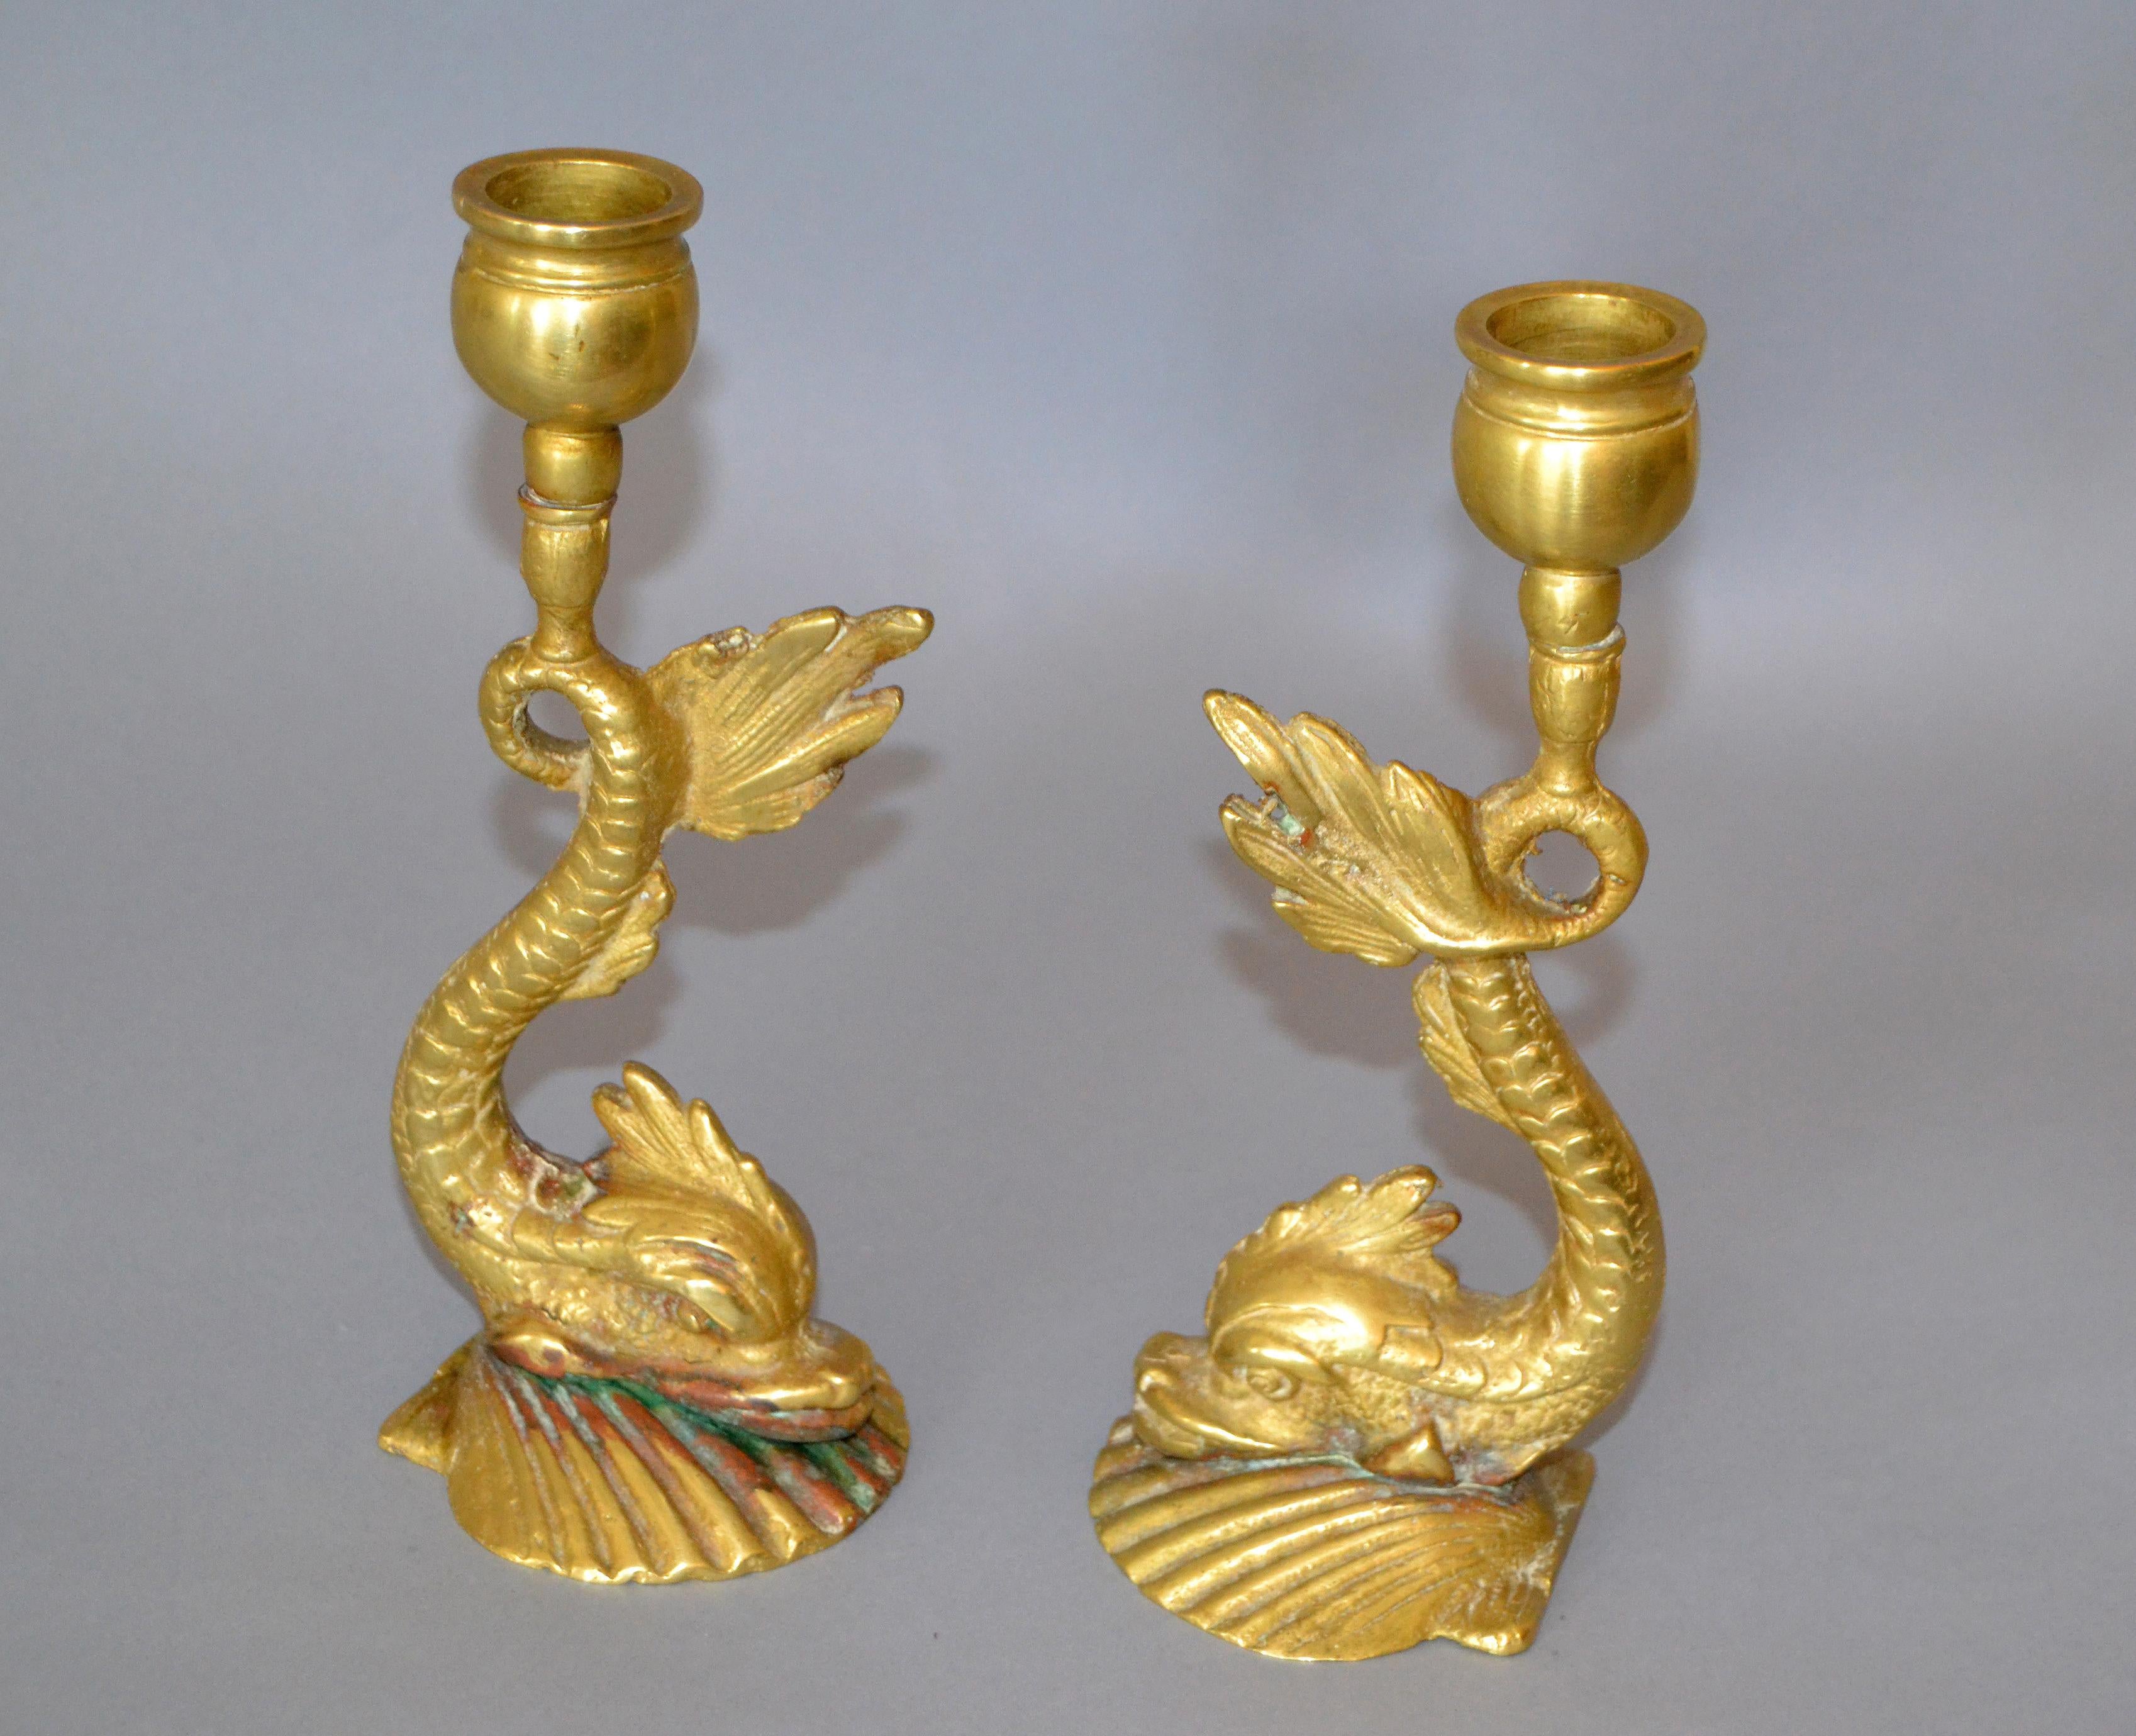 Pair of neoclassical bronze Koi fish or sea serpent figurative candlesticks, candleholders.
These Asian inspired sculptural curved candlesticks feature a fish-like creature mounted on a shell form base. The set is quite heavy.
The bronze shows a